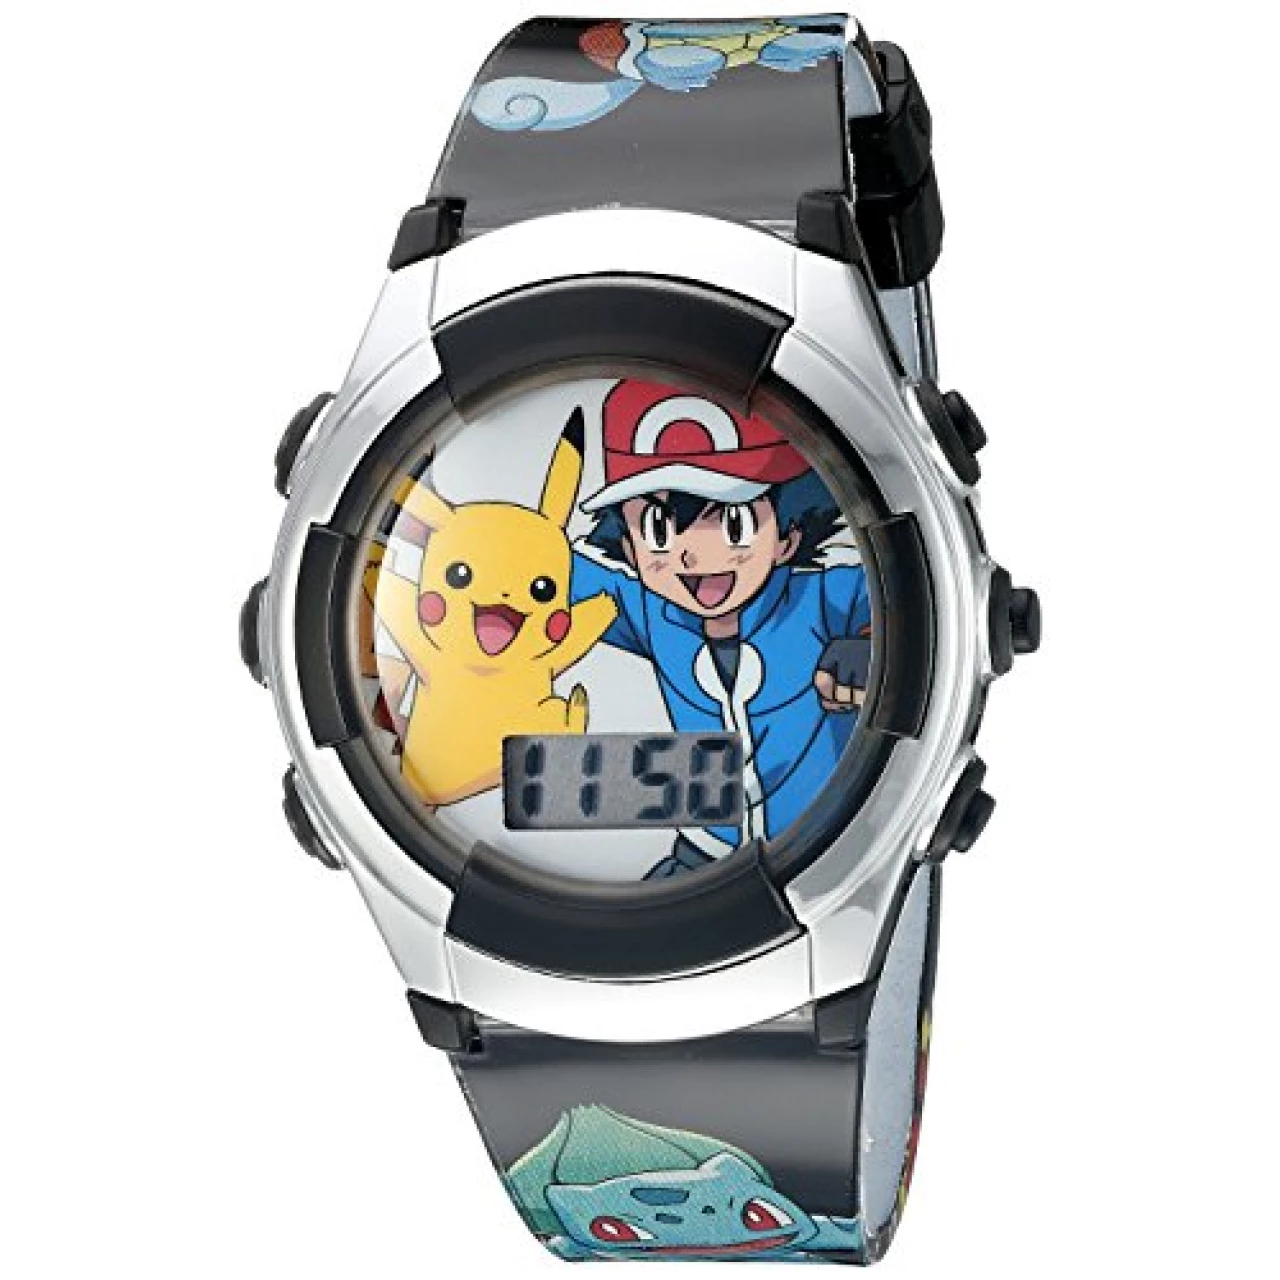 Accutime Kids Pokemon Ash &amp; Pikachu Digital LCD Quartz Multicolor Wrist Watch with Black Strap, Cool Inexpensive Gift &amp; Party Favor for Boys, Girls, Adults All Ages (Model: POK3018)